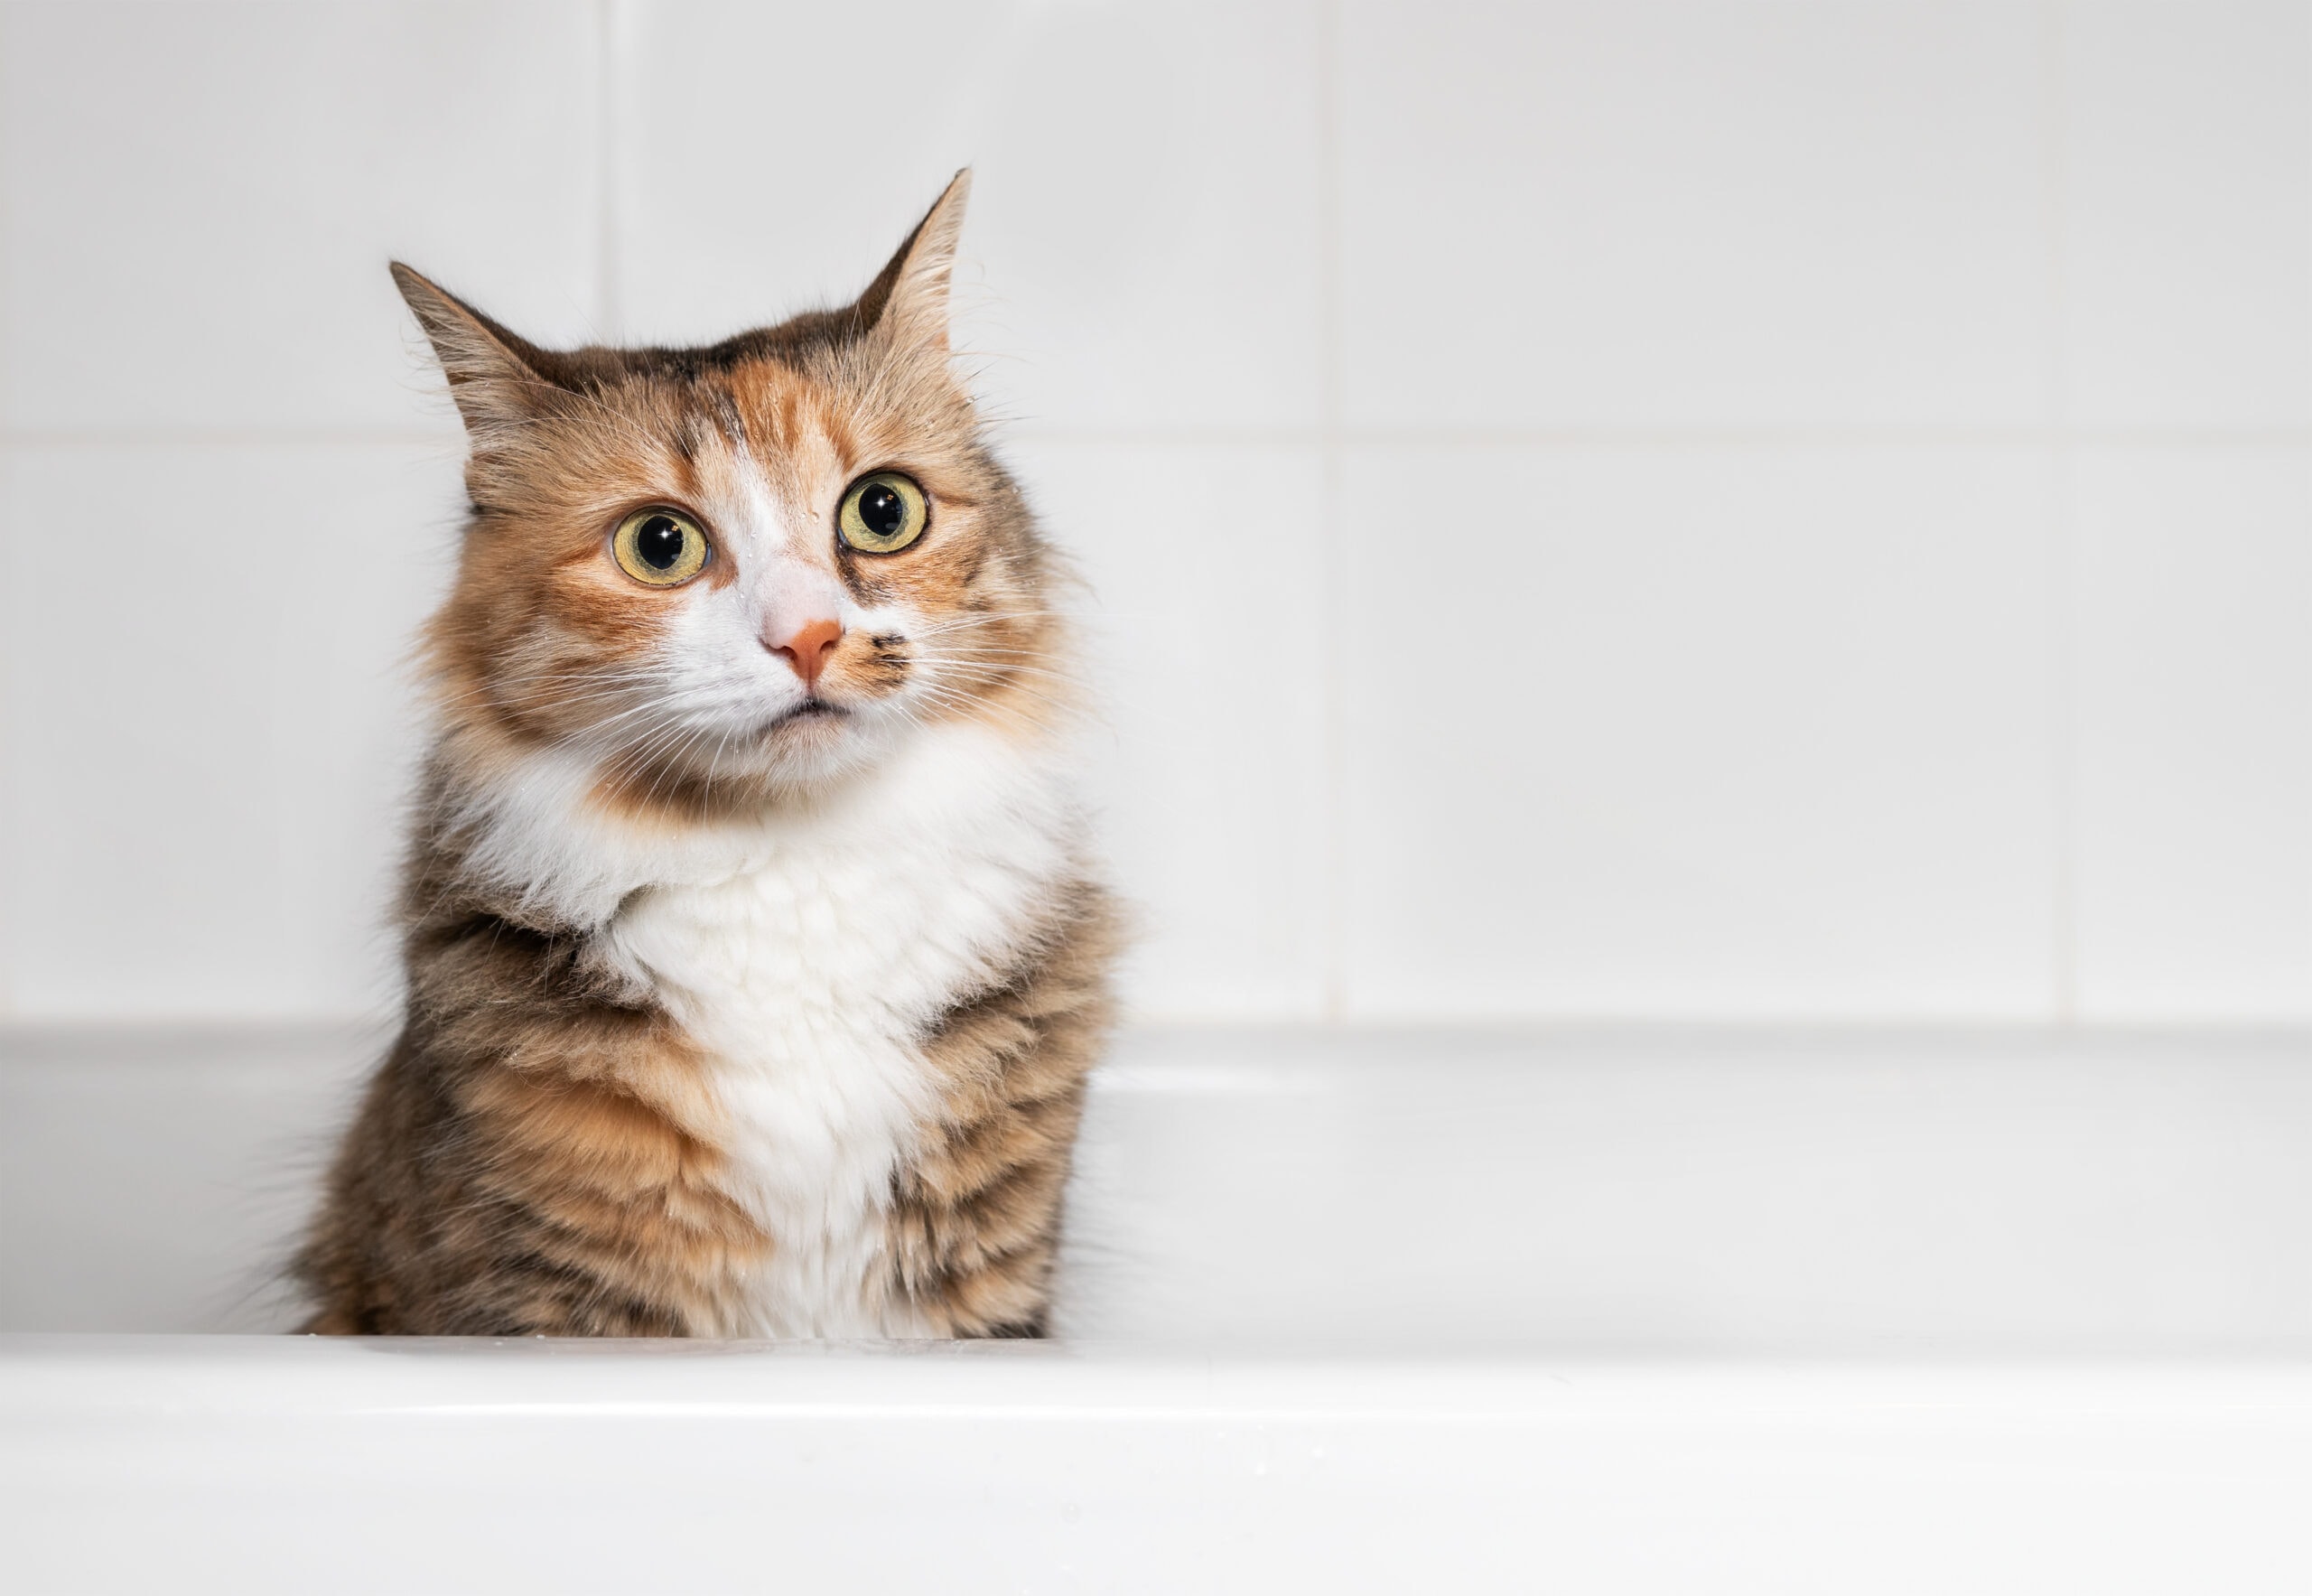 Why Does My Cat Like Sitting In The Bathtub?